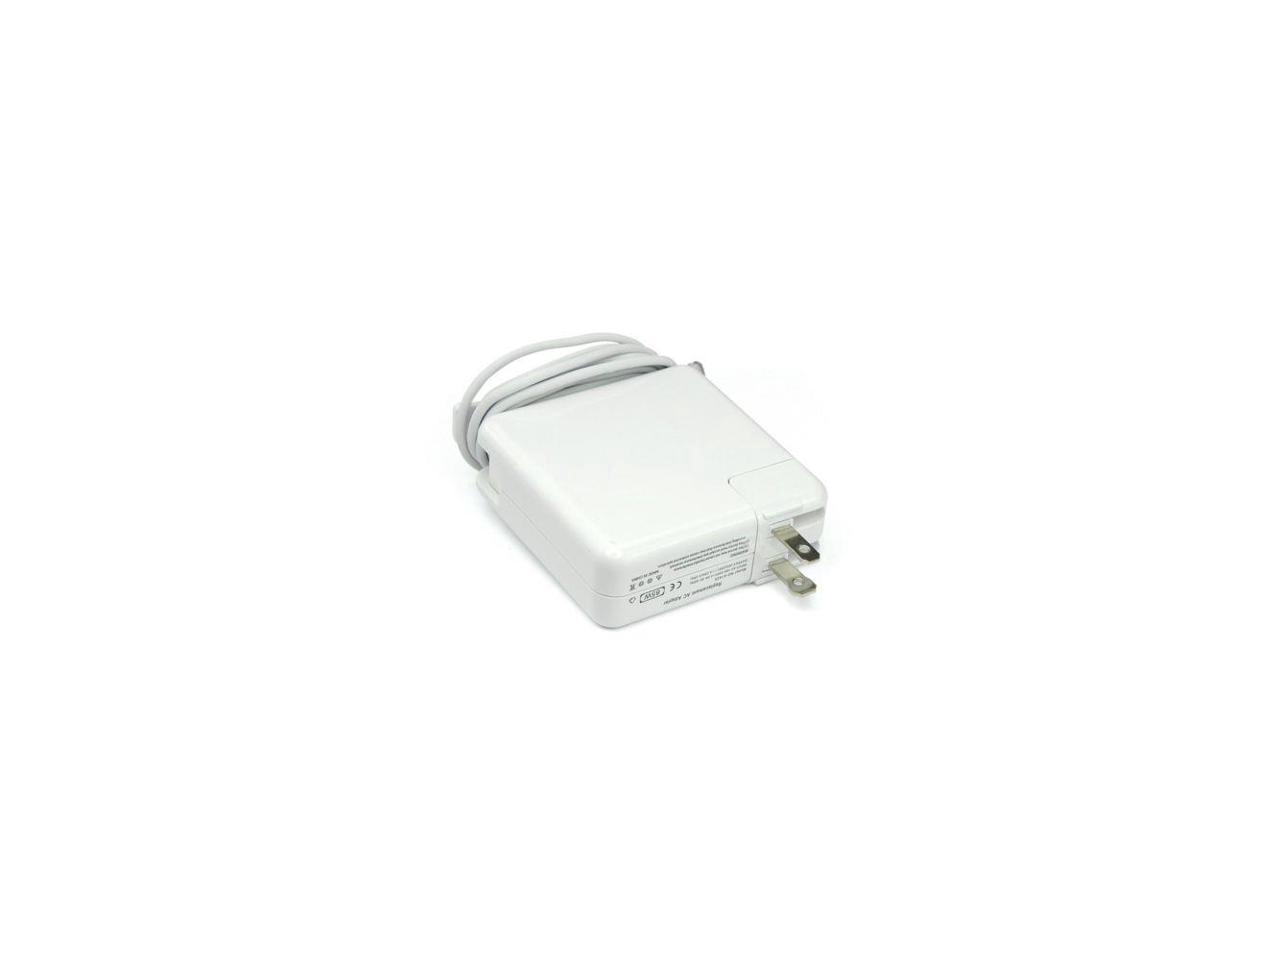 new macbook air 13 inch charger